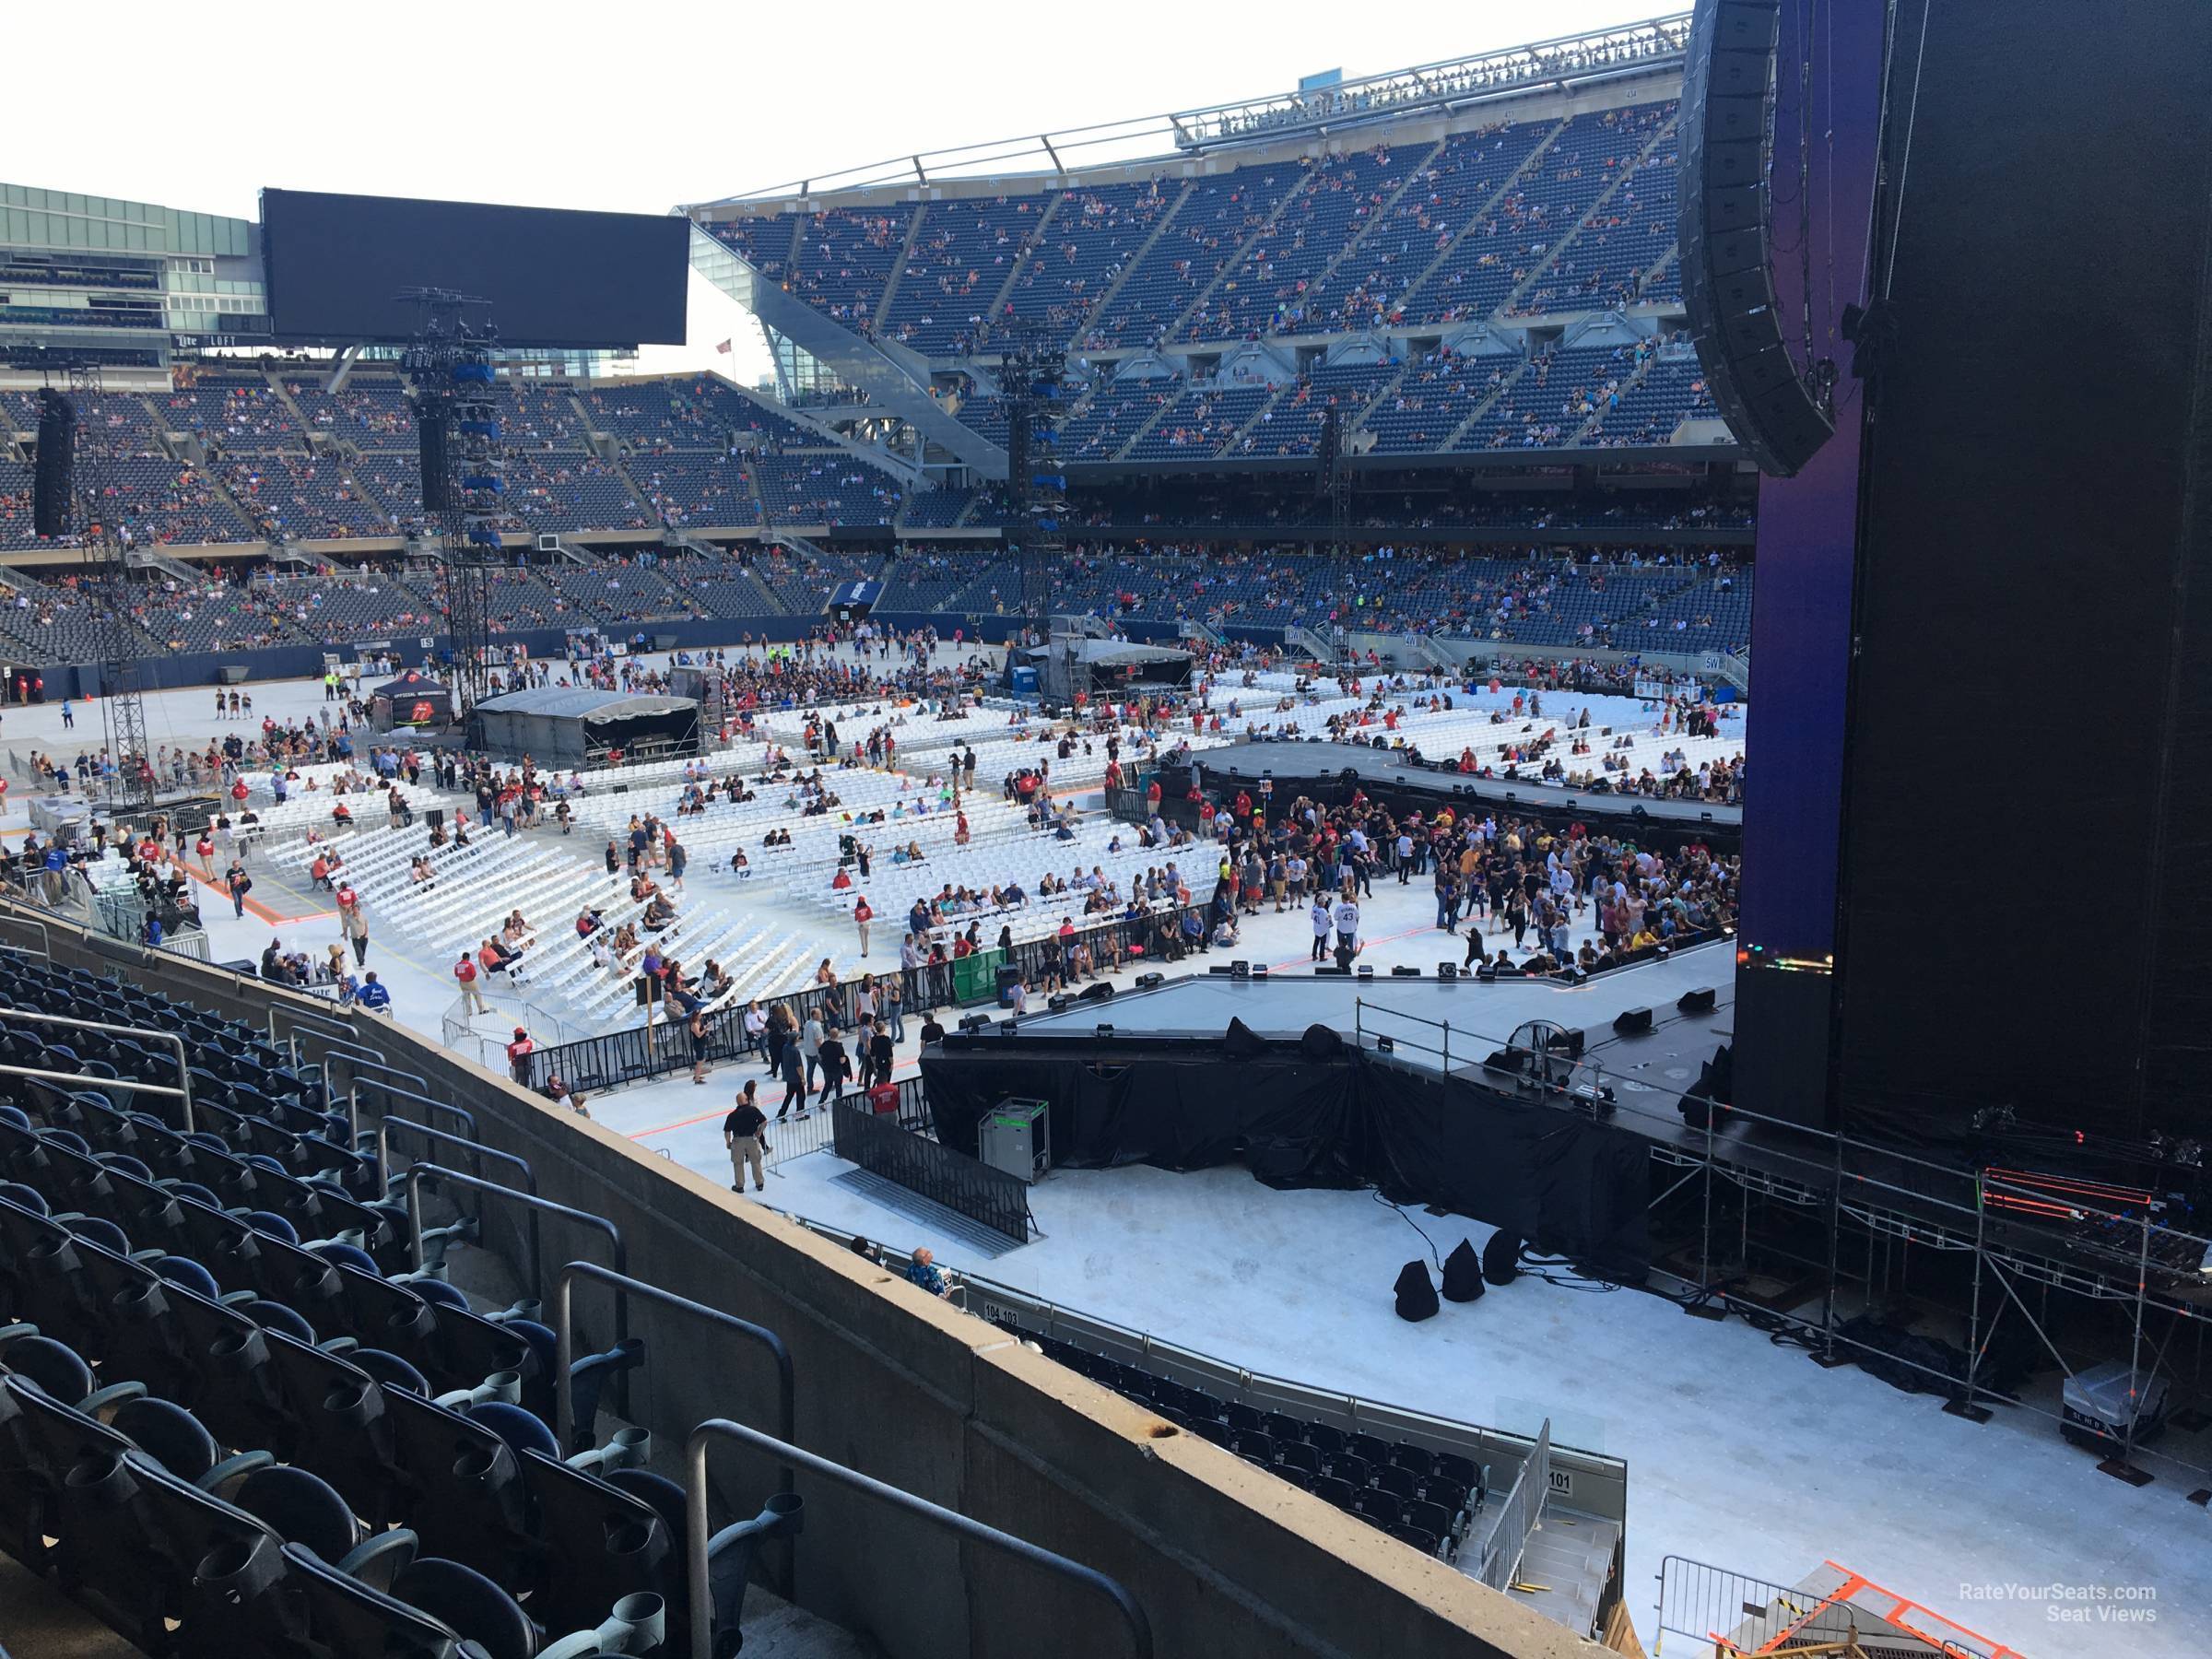 section 202, row 11 seat view  for concert - soldier field